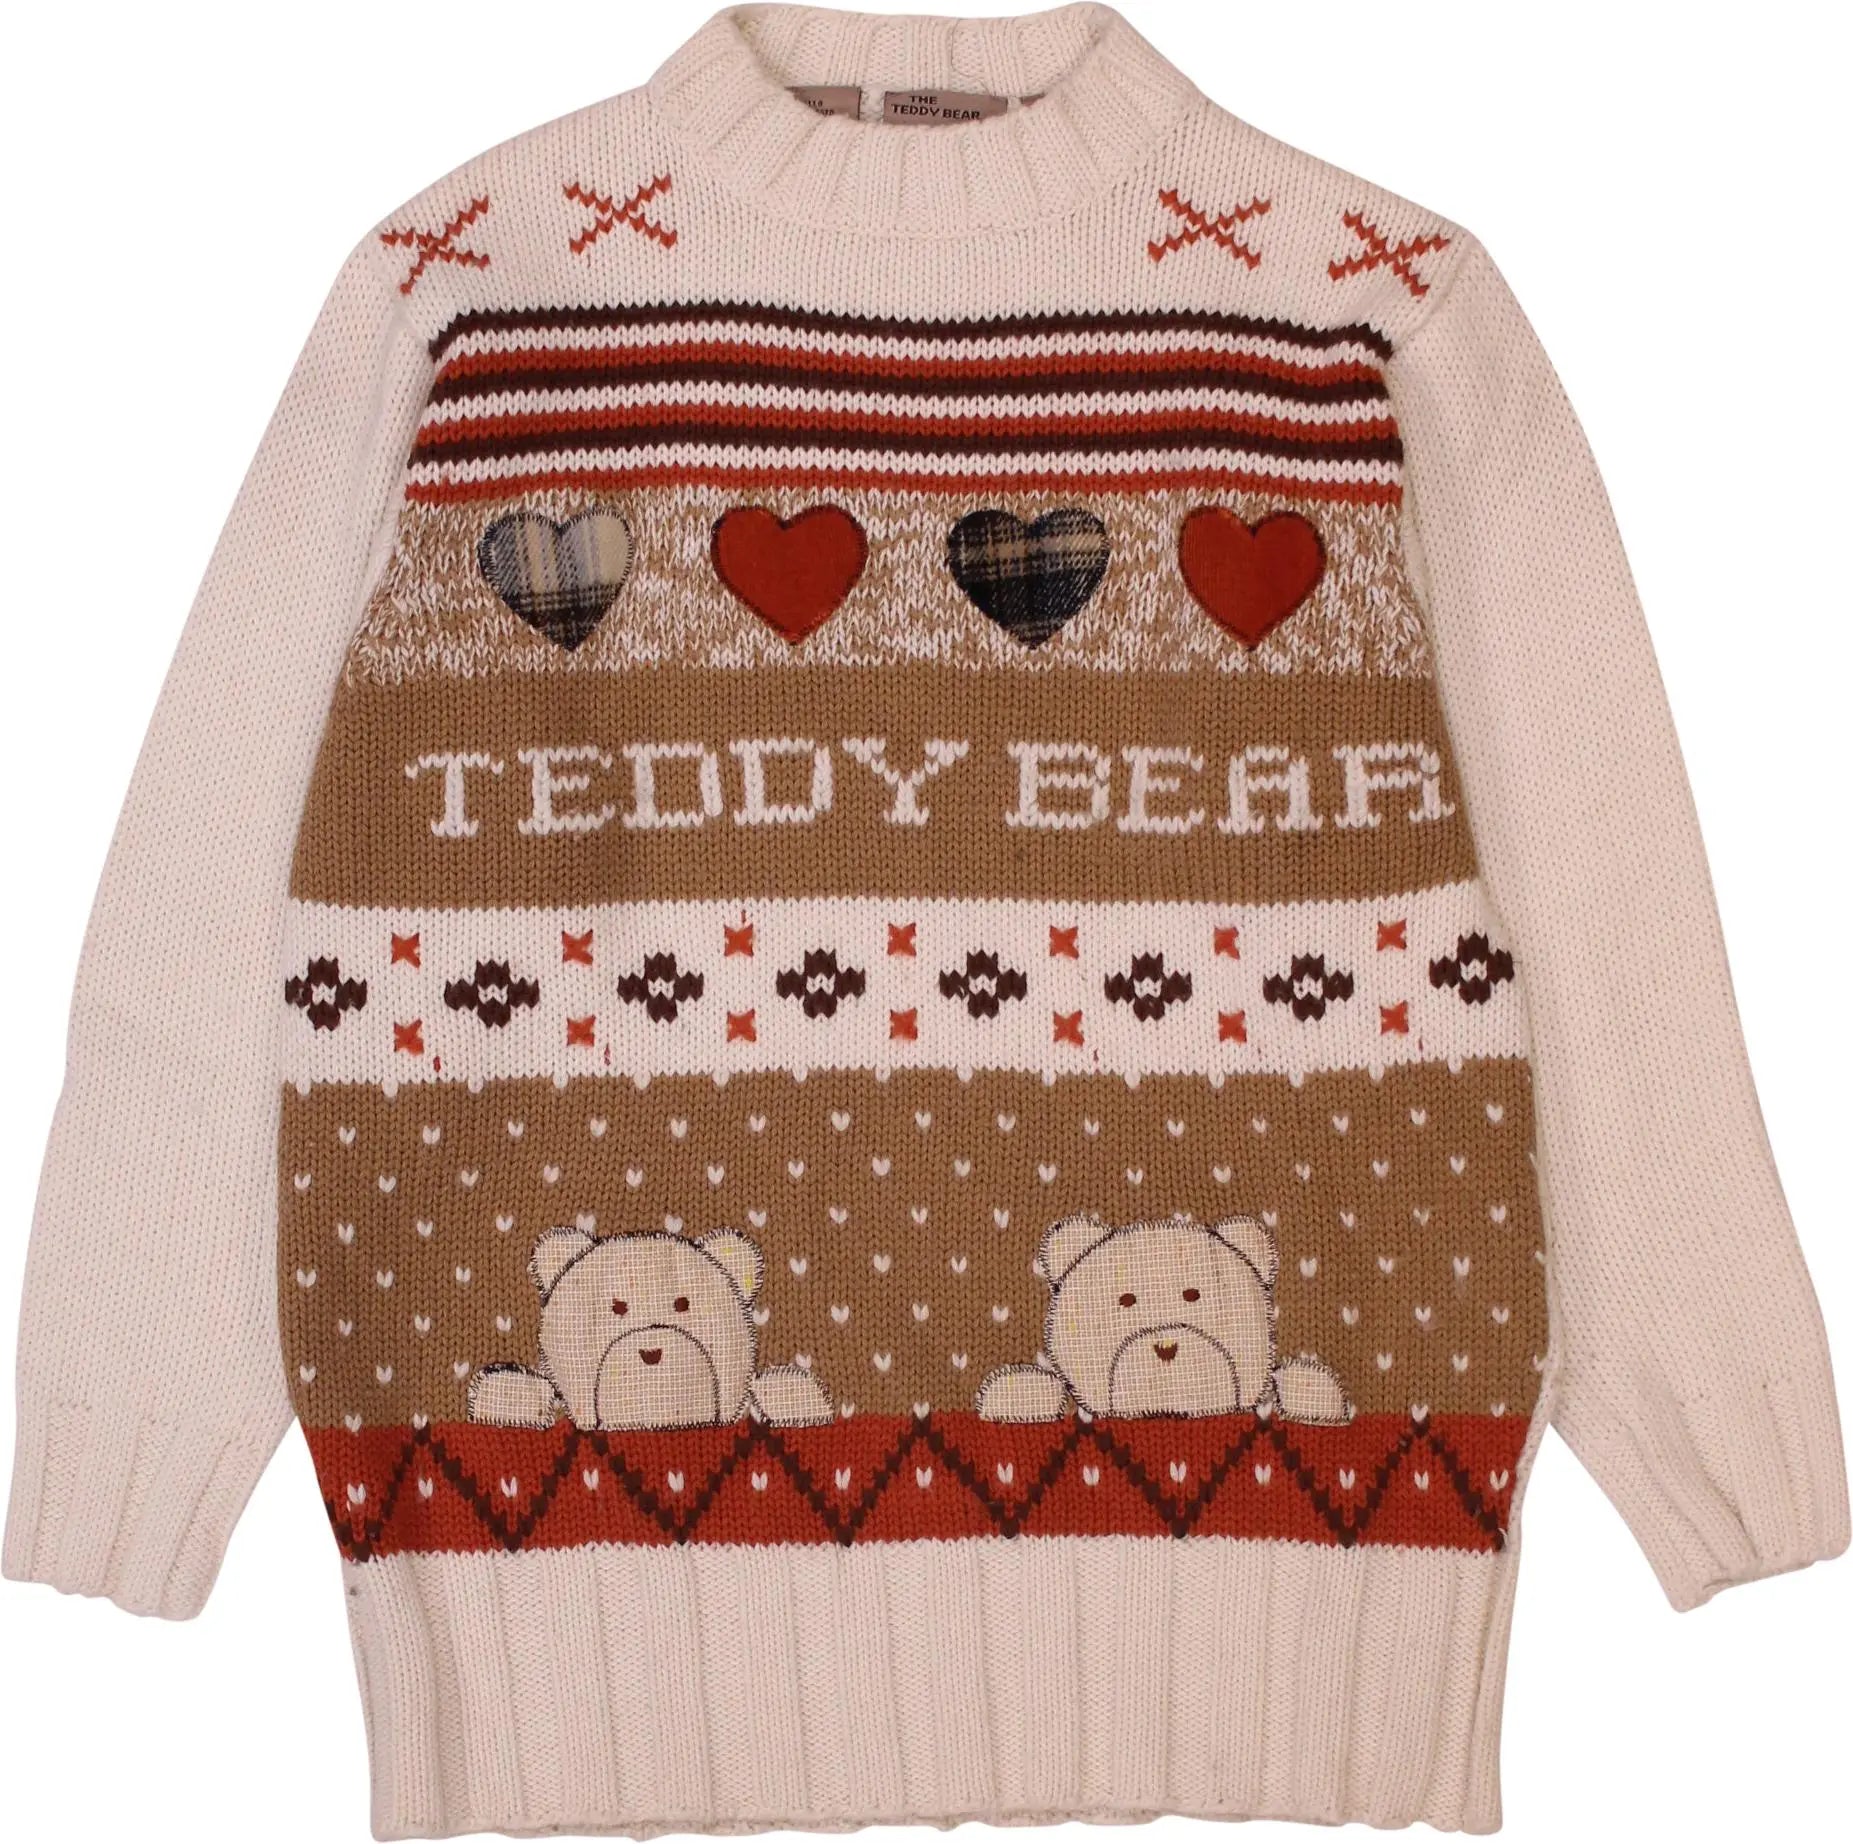 The Teddy Bear - Knitted 'Teddy Bear' Sweater- ThriftTale.com - Vintage and second handclothing